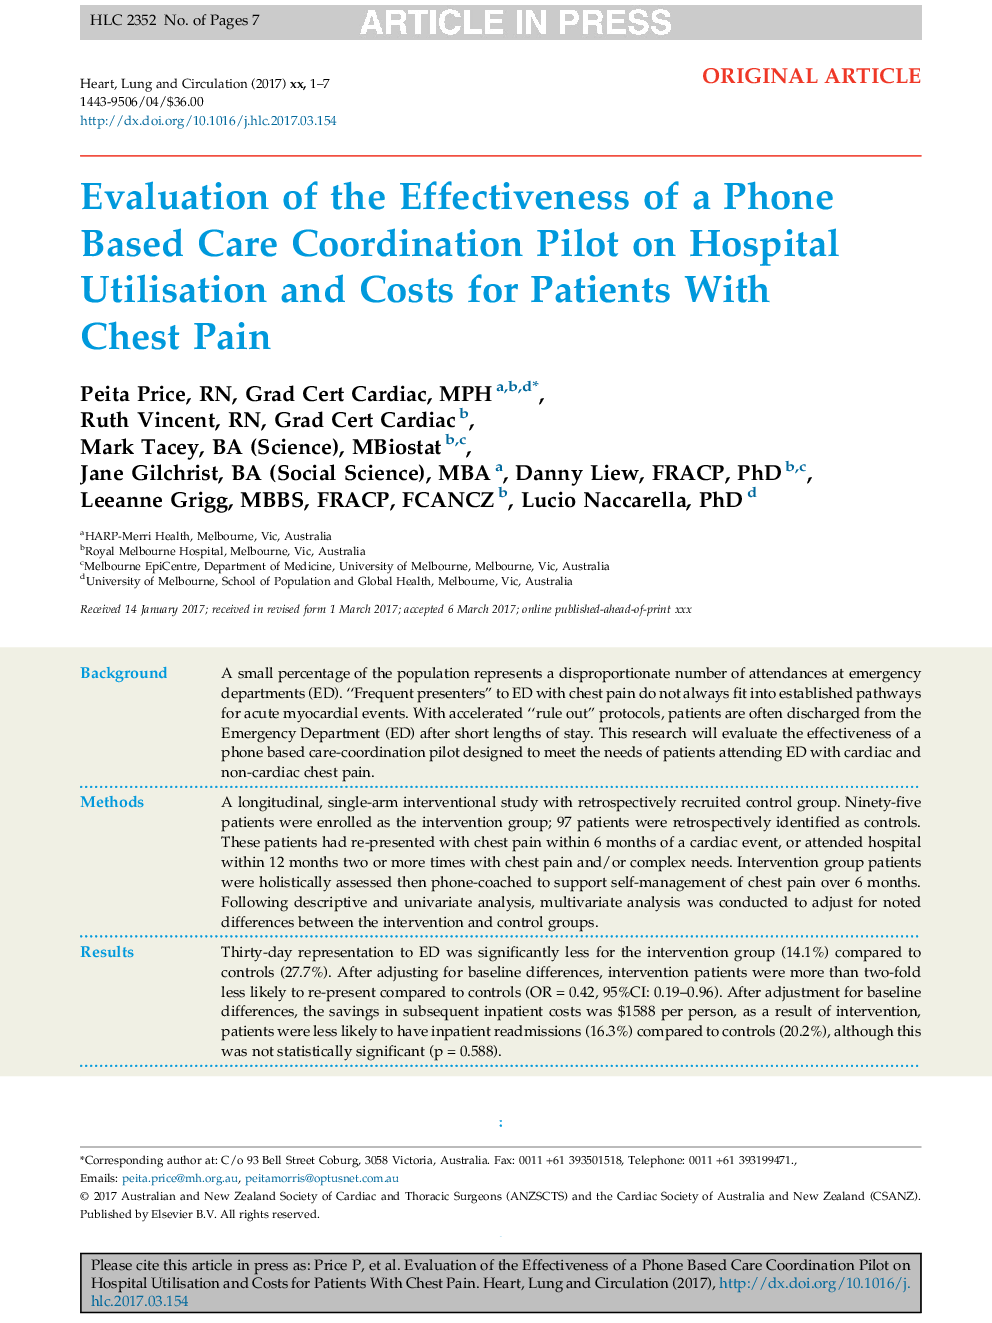 Evaluation of the Effectiveness of a Phone Based Care Coordination Pilot on Hospital Utilisation and Costs for Patients With Chest Pain